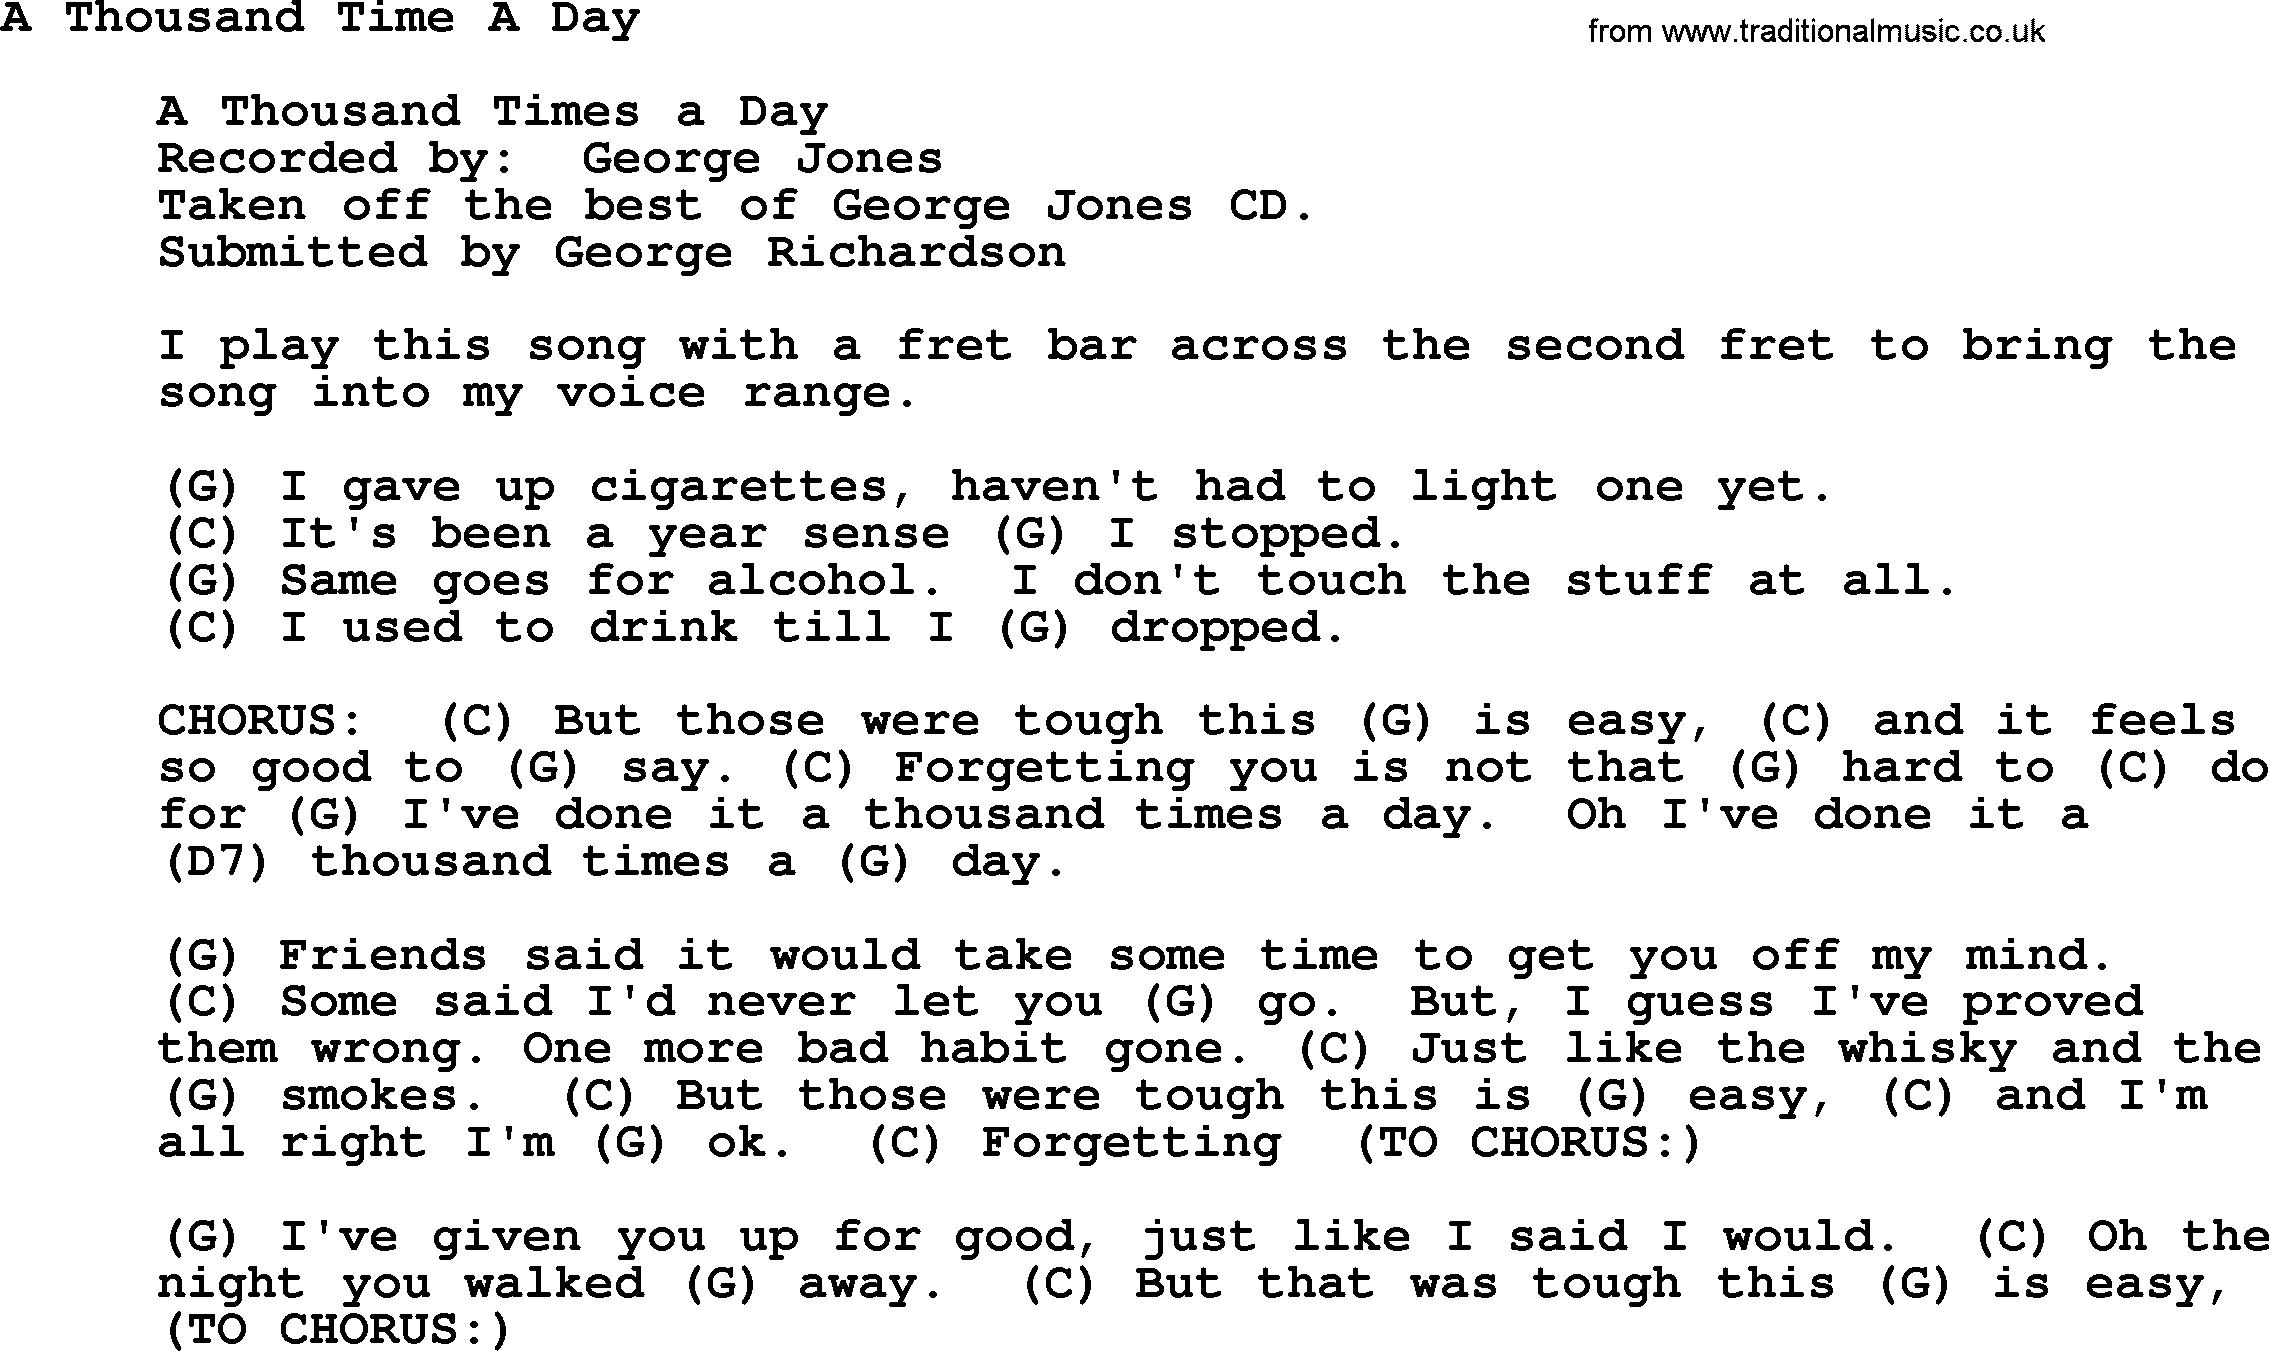 George Jones song: A Thousand Time A Day, lyrics and chords